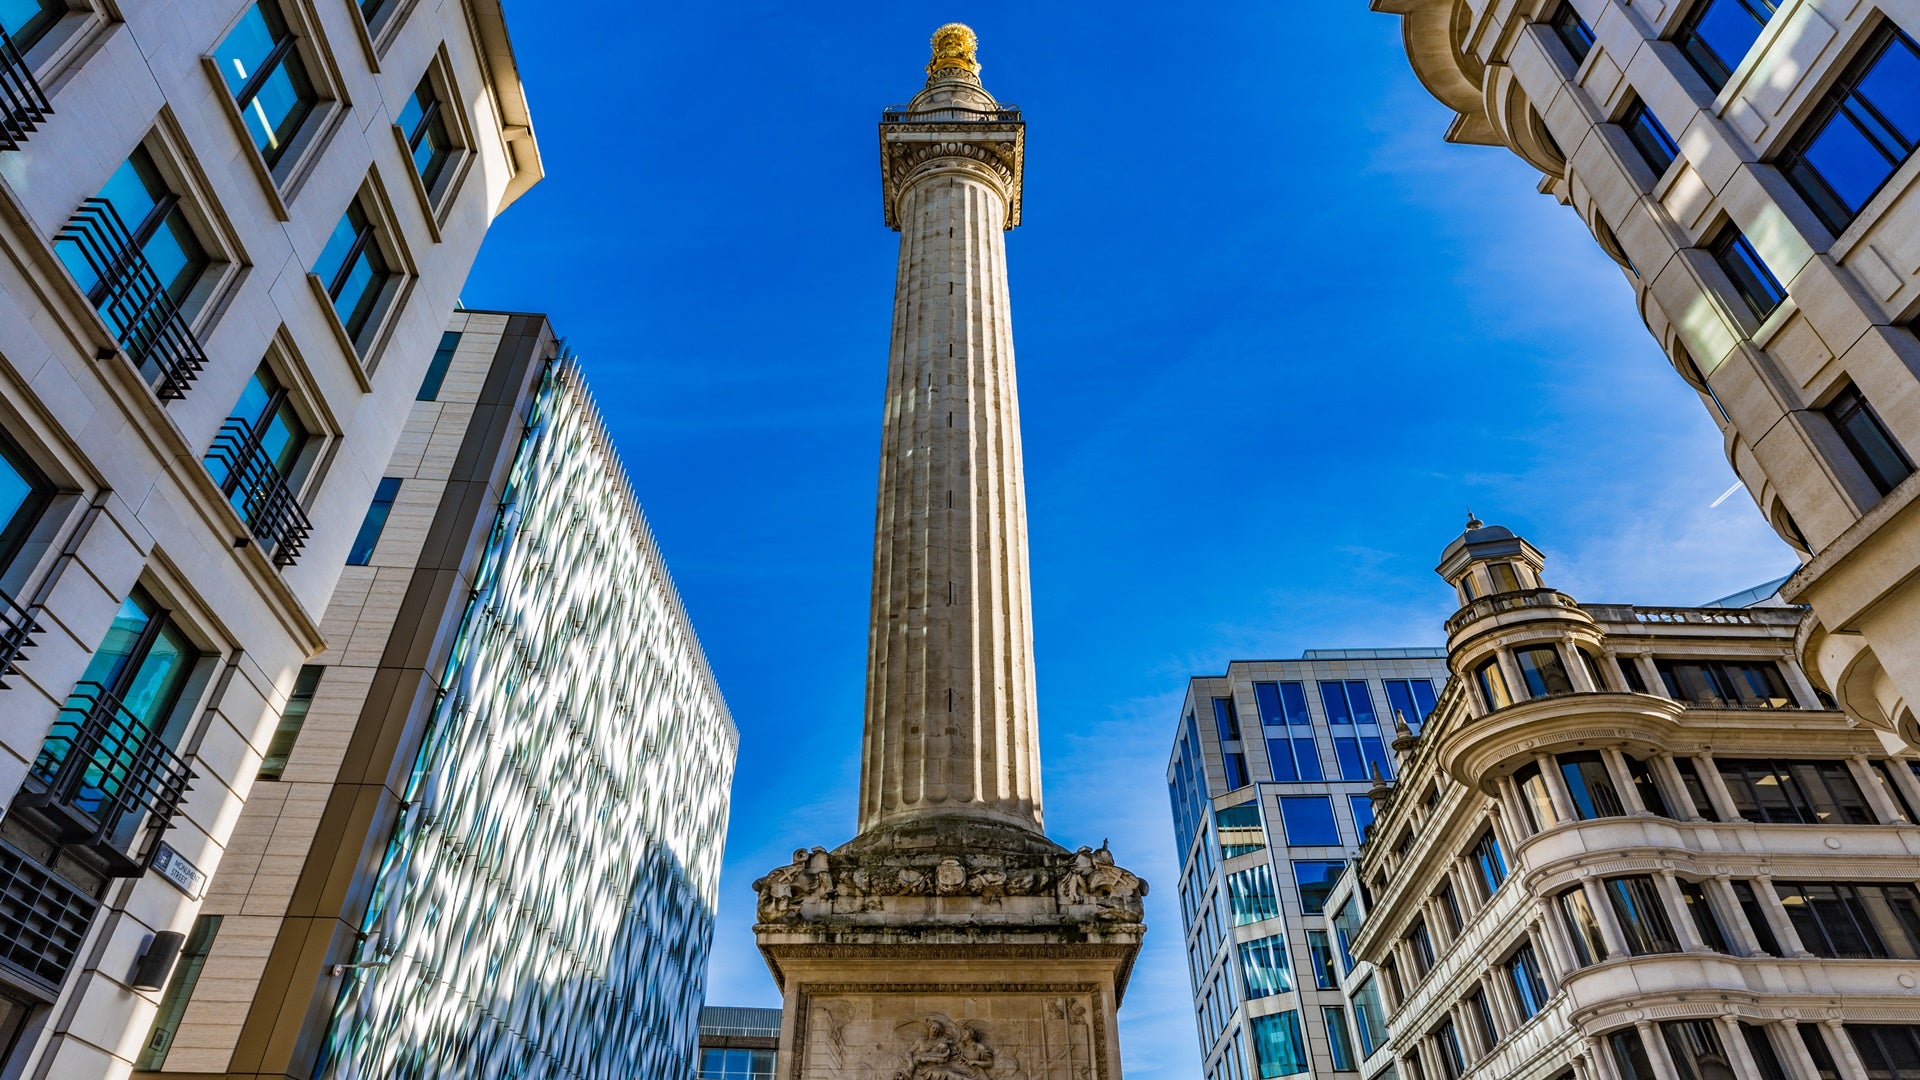 Monument to the Great Fire of London in London, United Kingdom.